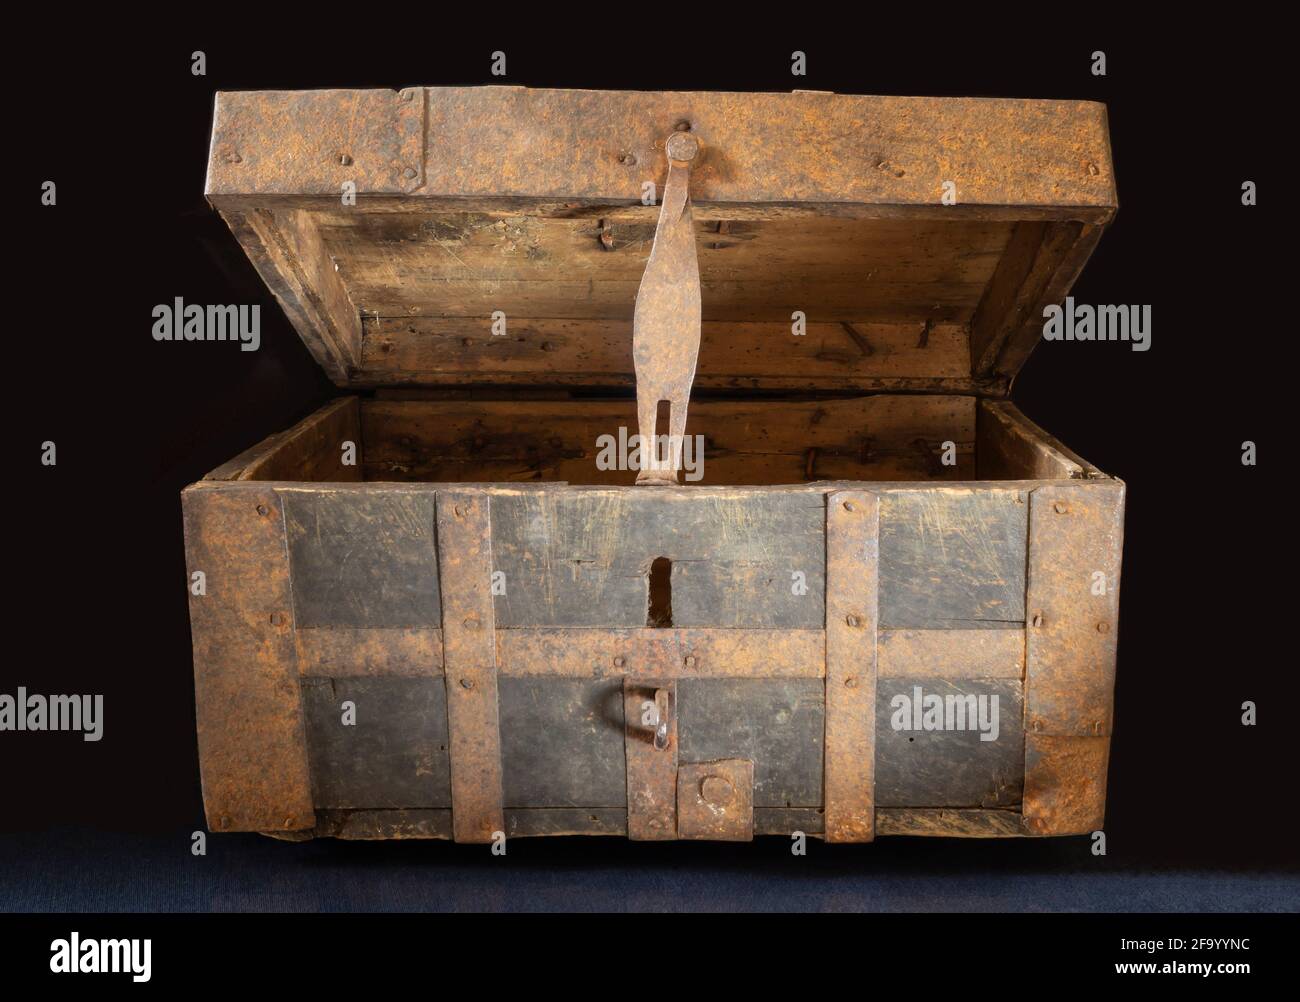 An old chest made of wood upholstered with iron. Open box on black background Stock Photo